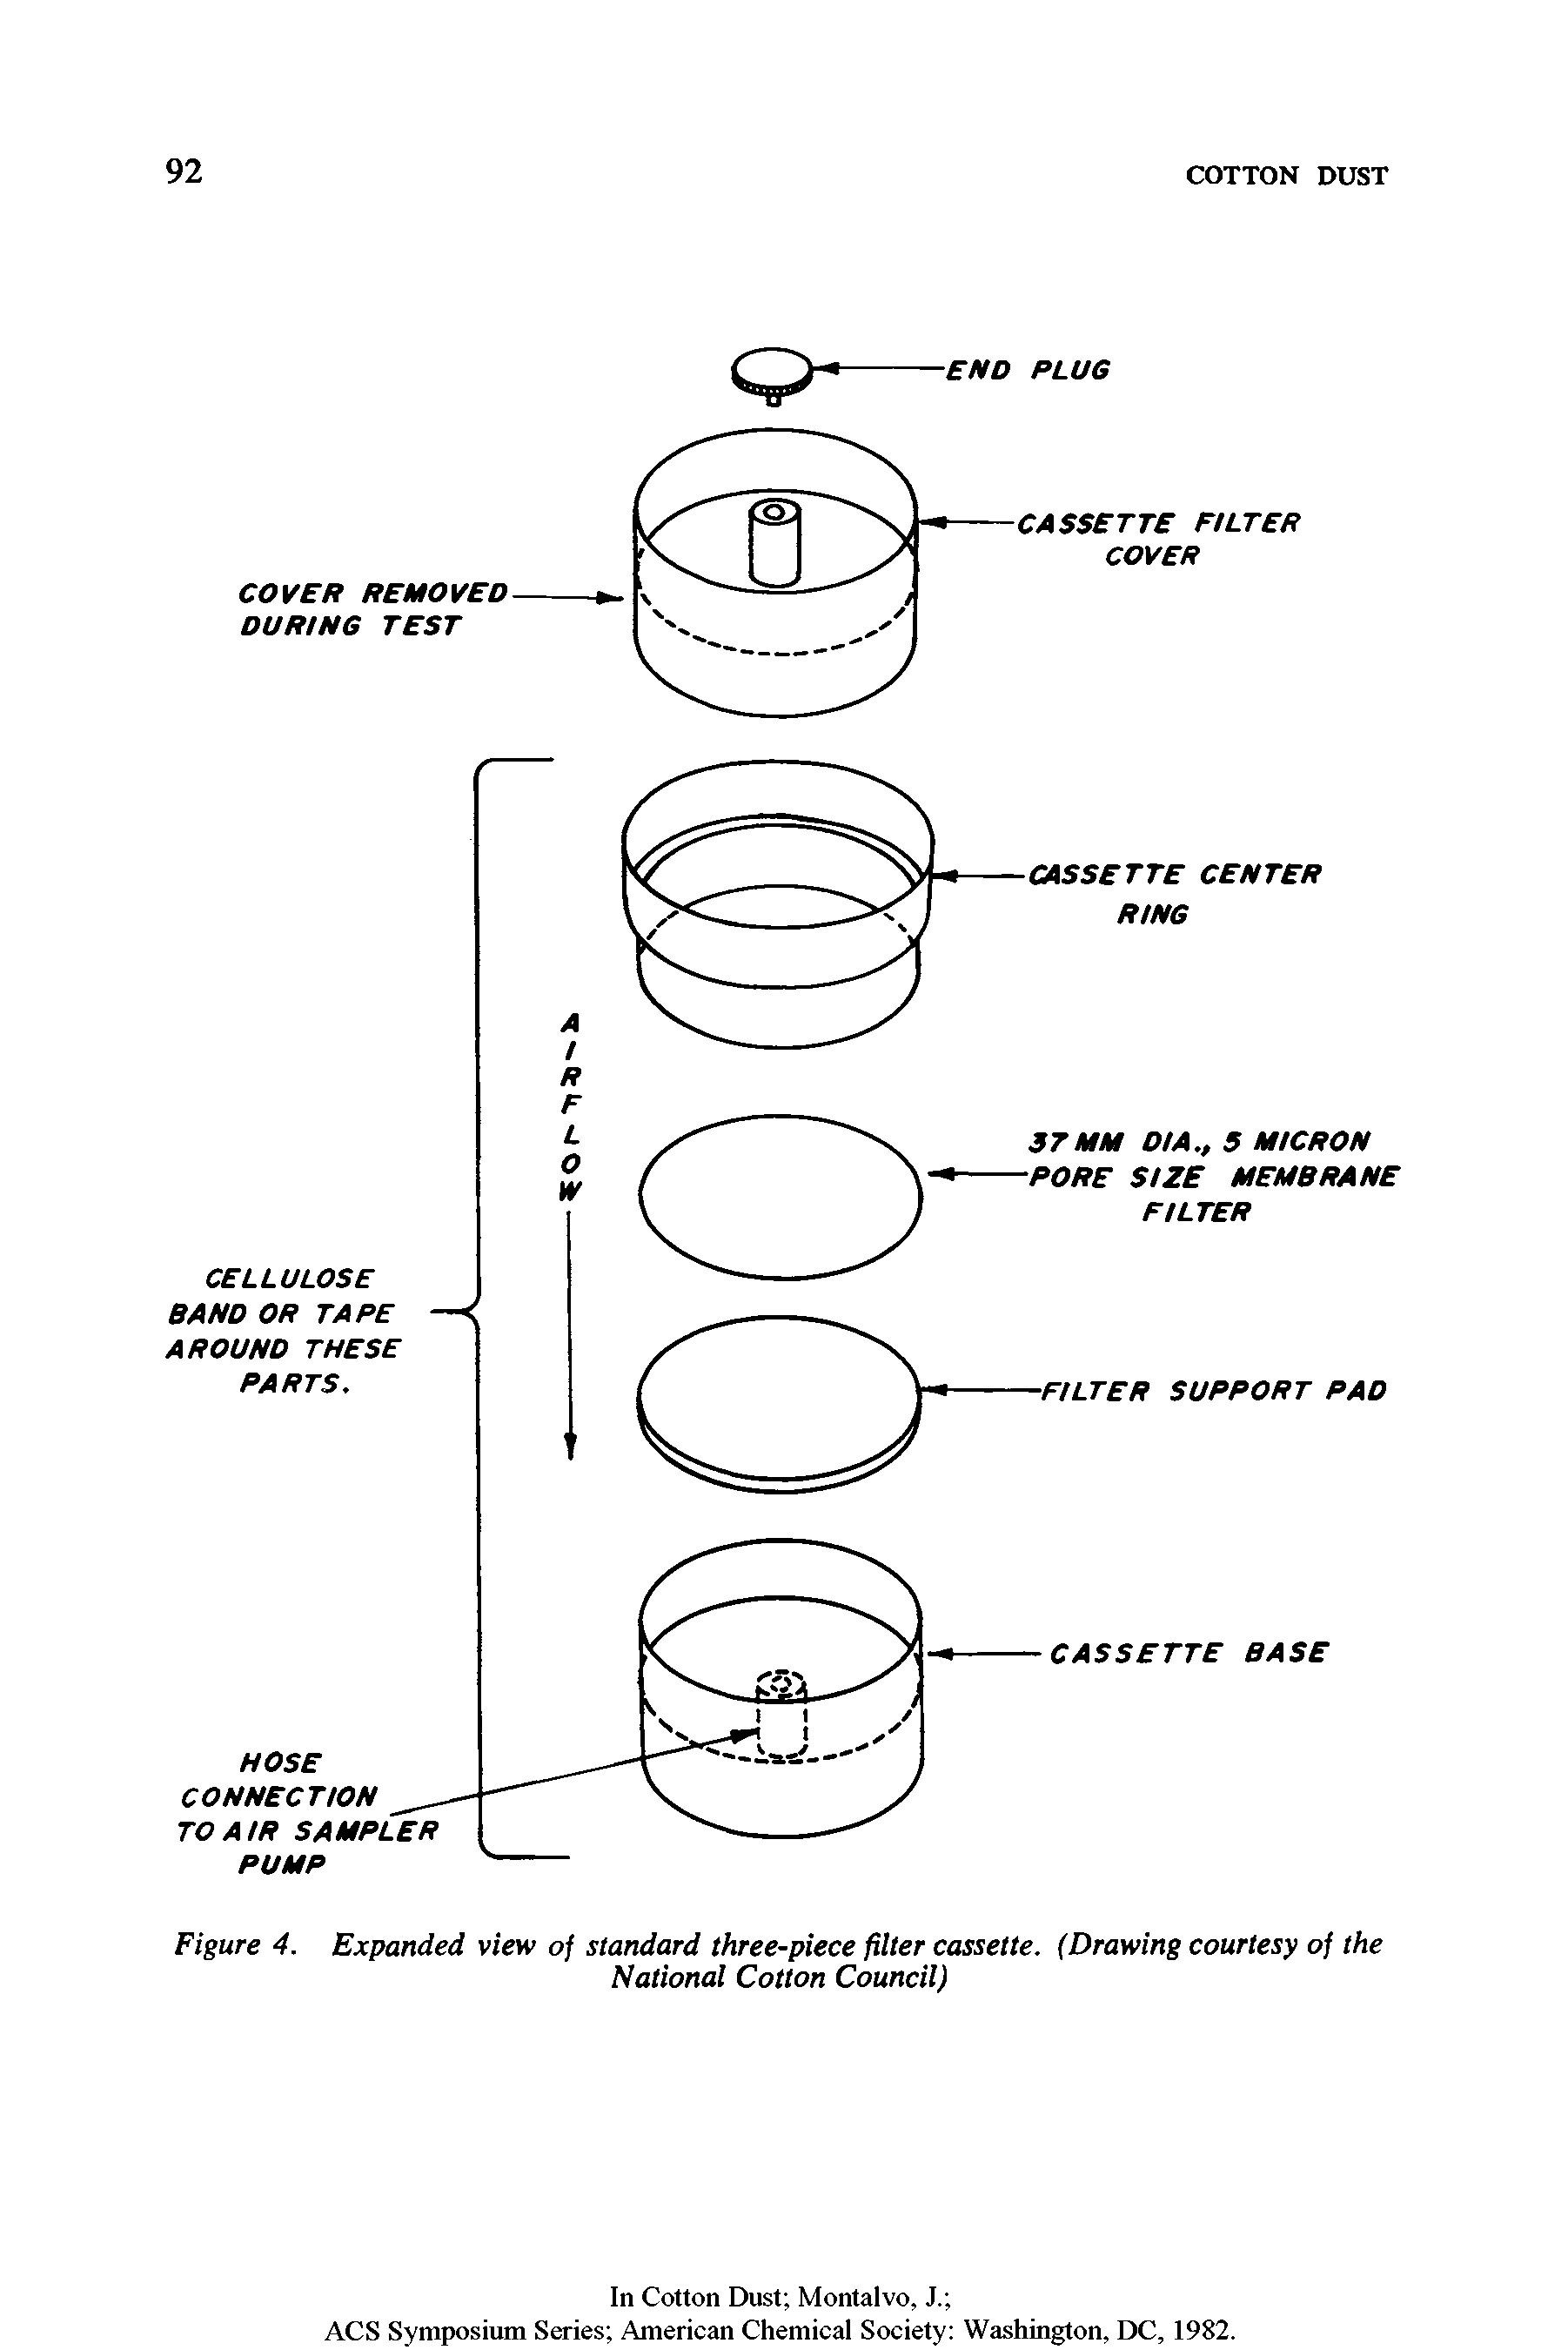 Figure 4. Expanded view of standard three-piece filter cassette. (Drawing courtesy of the...